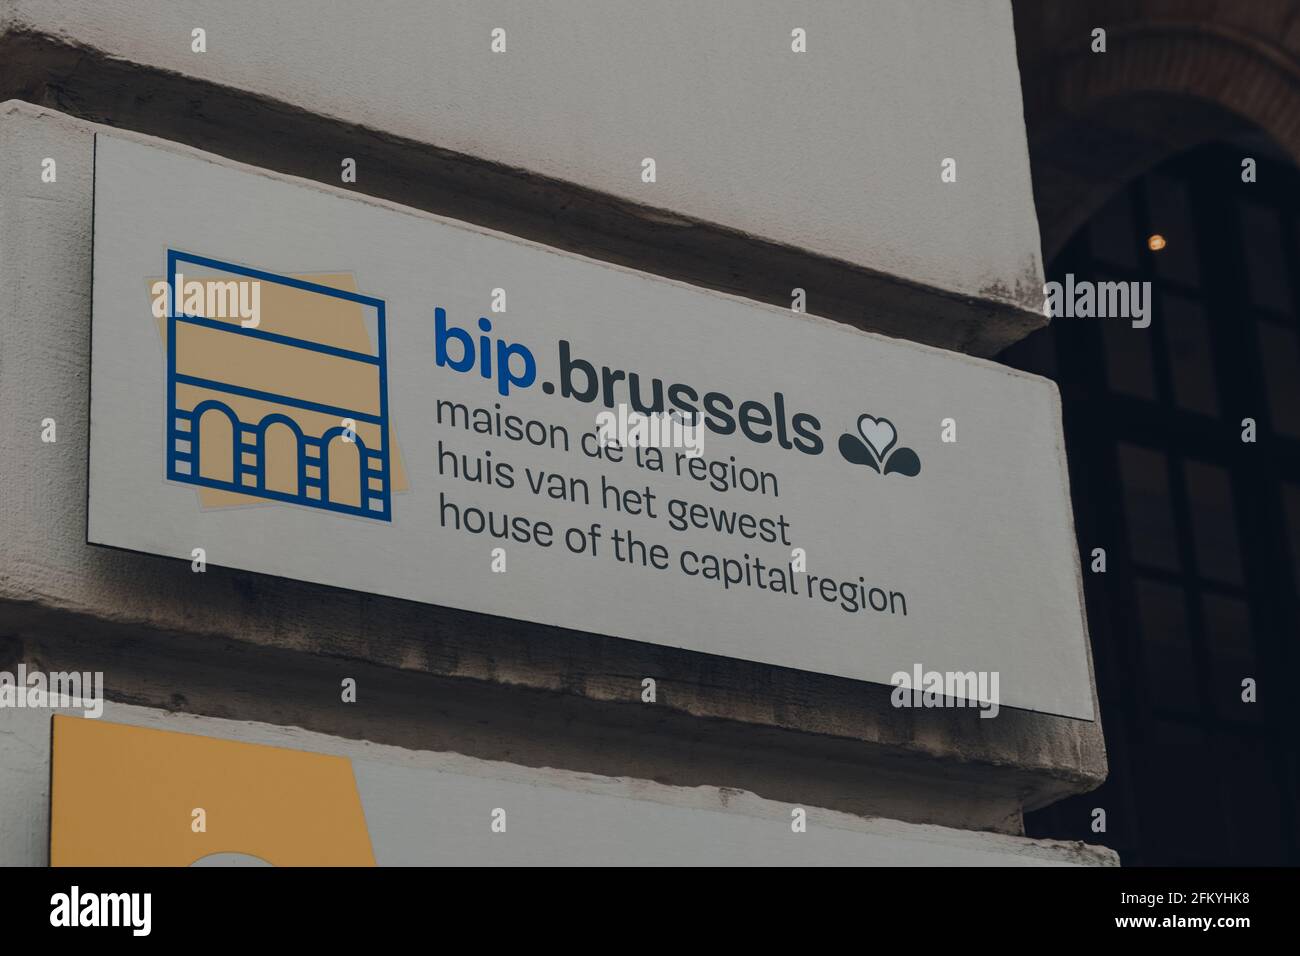 Brussels, Belgium - August 16, 2019: Sign at the entrance to bip.brussels, the house of the Brussels-Capital region providing information about entert Stock Photo